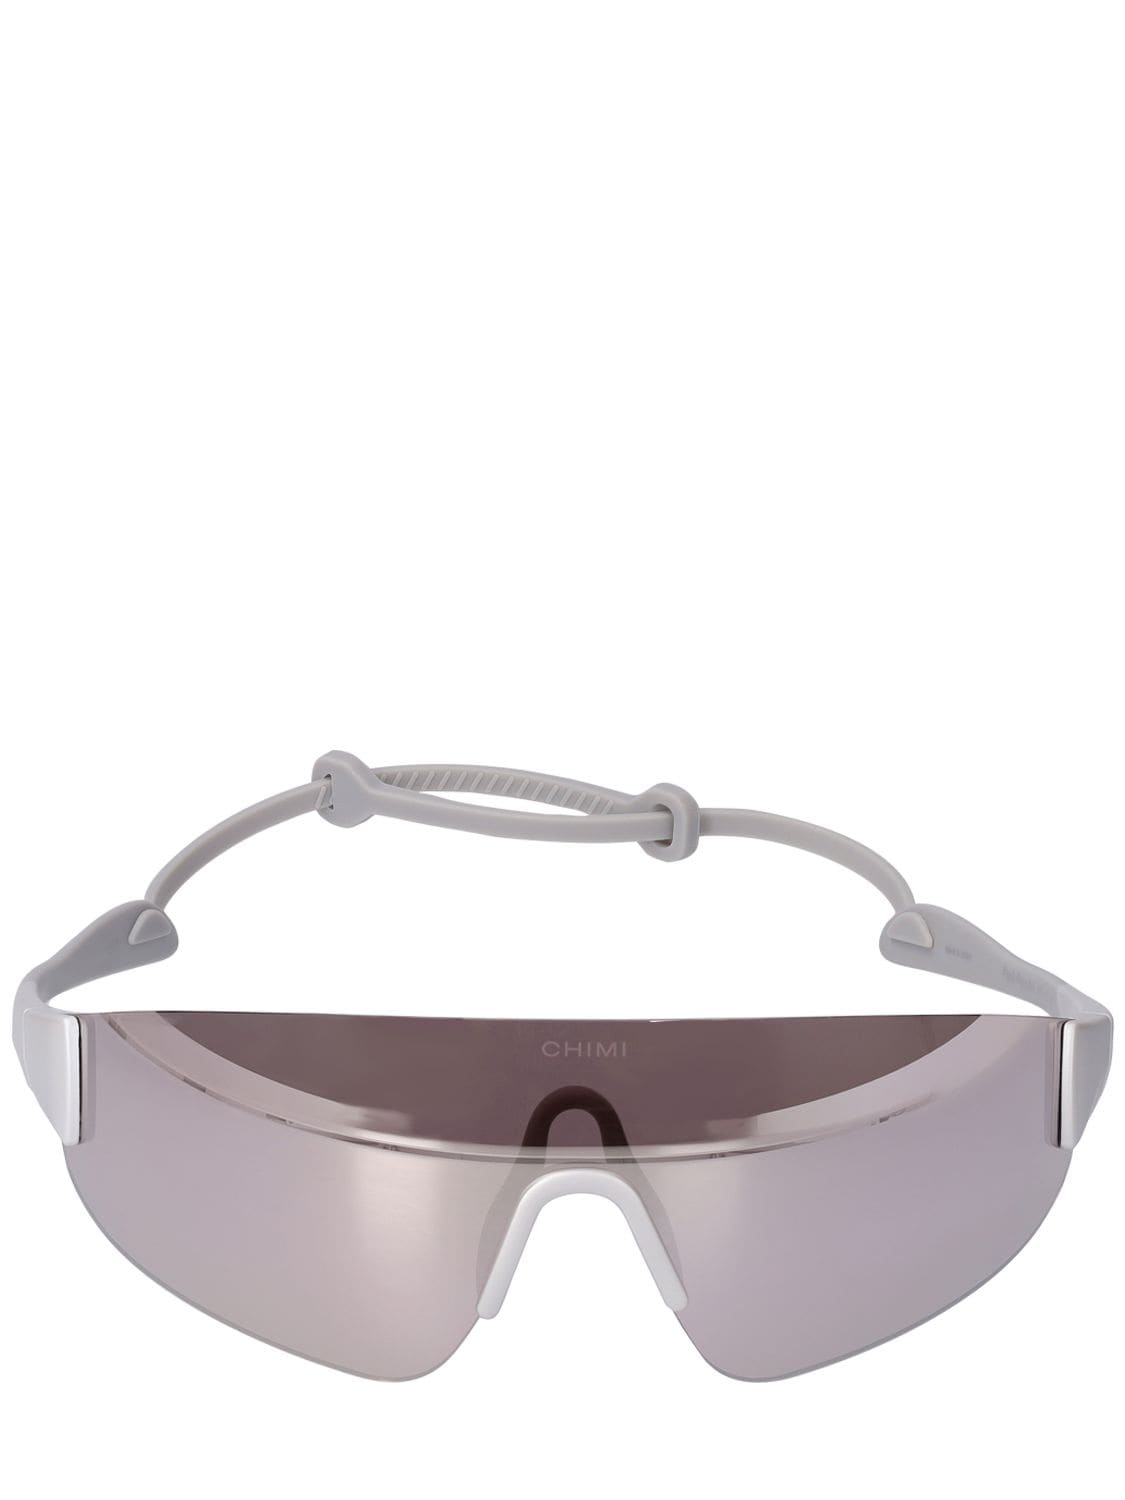 Chimi Pace Ash Mask Sunglasses In Silver,grey